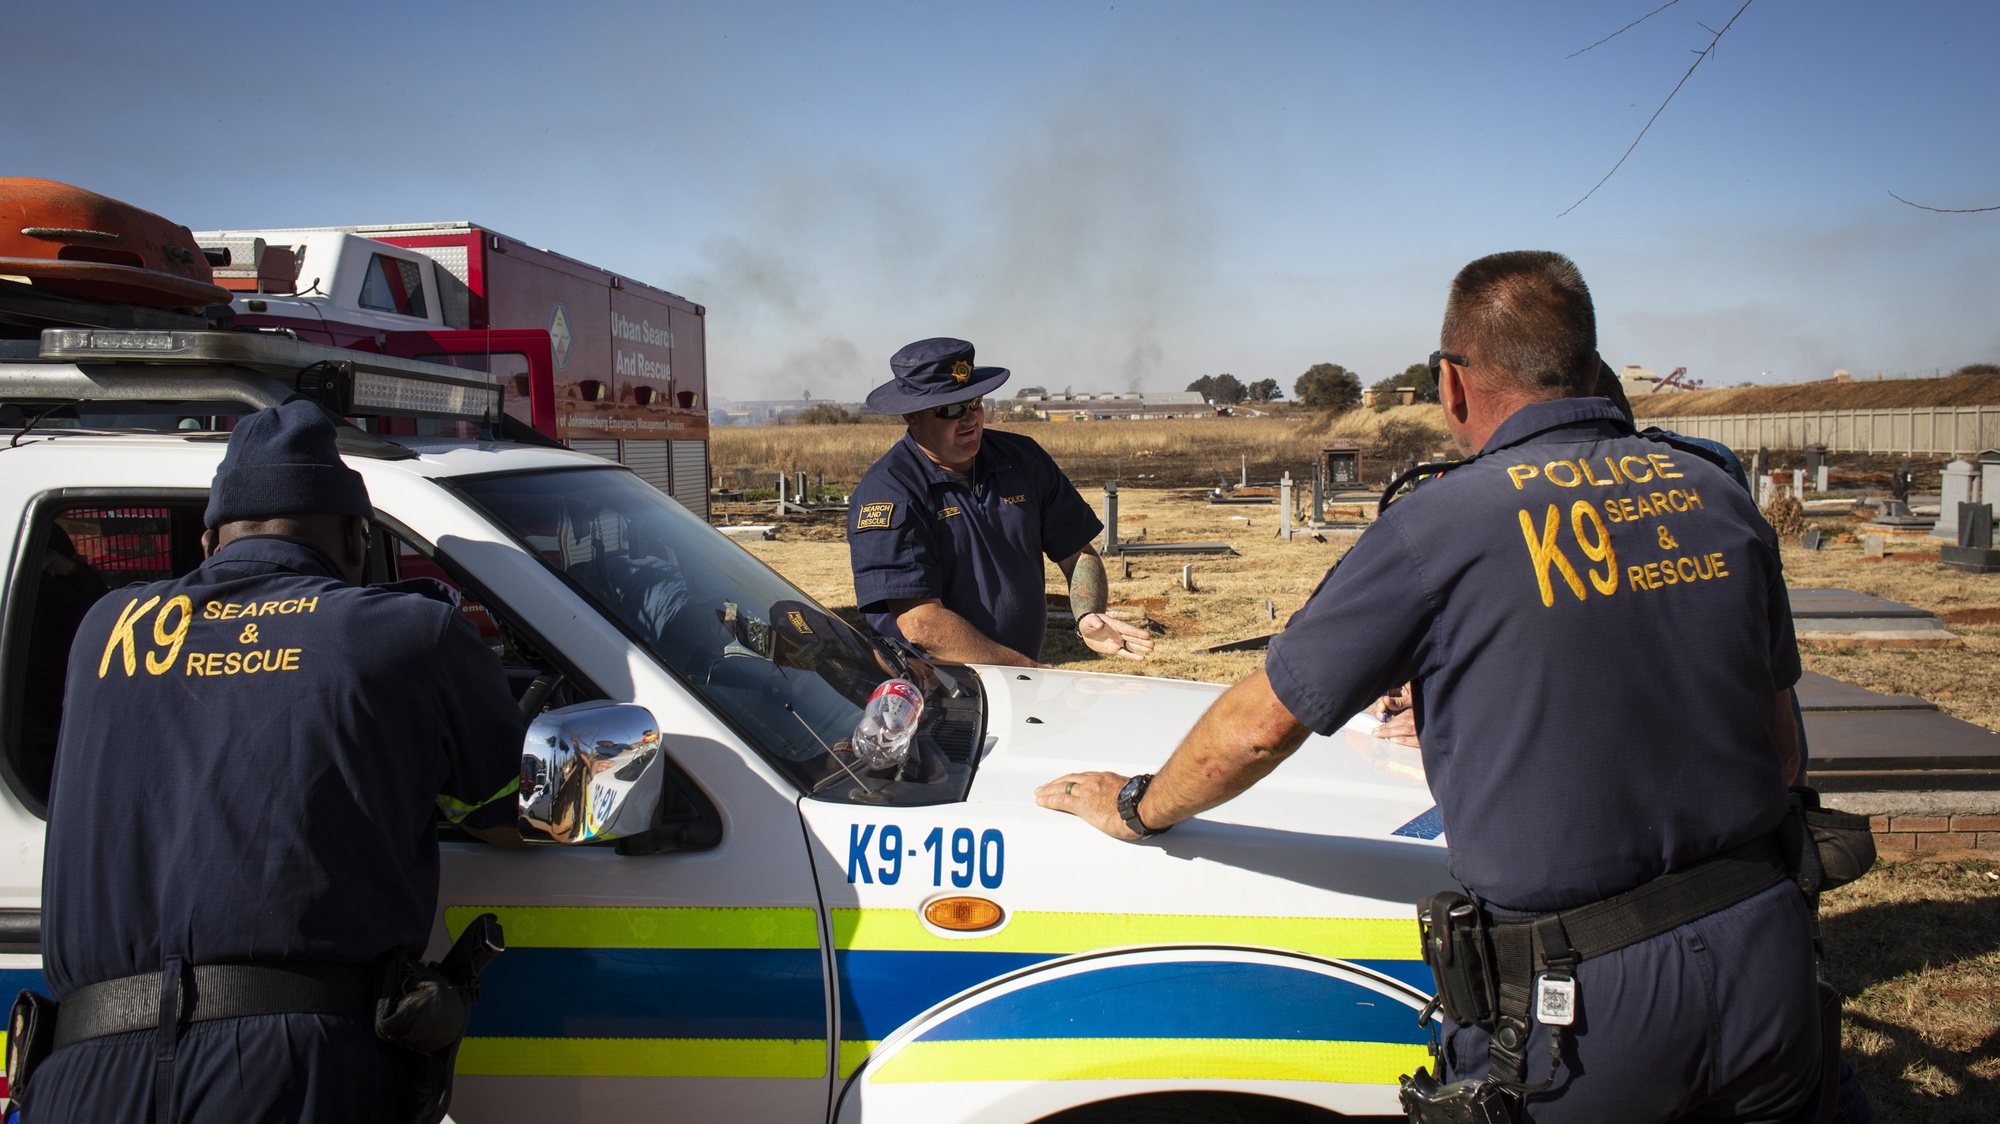 epa10018126 Members of the SAPS (South African Police Force) K9 unit discuss their approach during the ongoing search operation for a boy, Khayalethu Magadla (6), who fell into a water pipe six days ago, Soweto, Johannesburg , South Africa, 17 June 2022. Johannesburg EMS and SAPS police unites are continuing their search with robots being used in the underground waterways near where the boy went missing.  EPA/KIM LUDBROOK